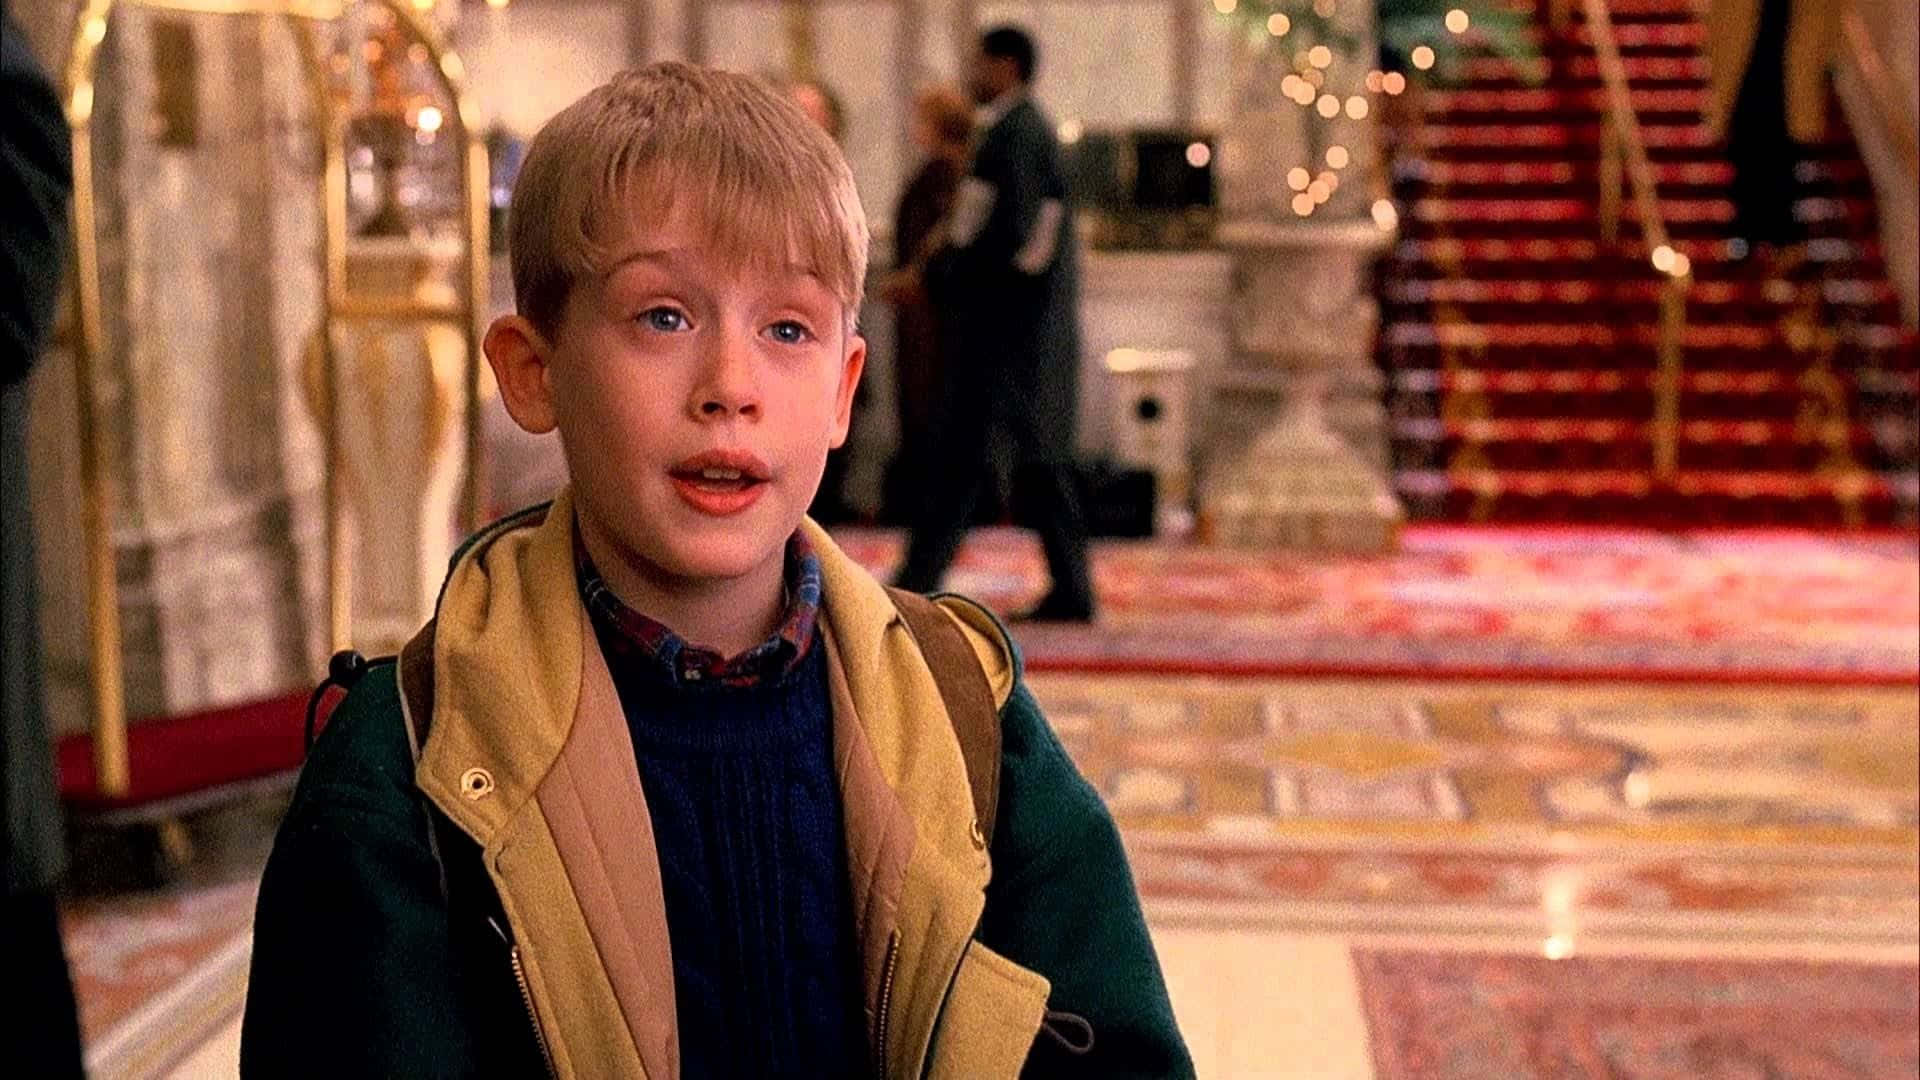 Nothing Like a Little Home Alone Time Wallpaper